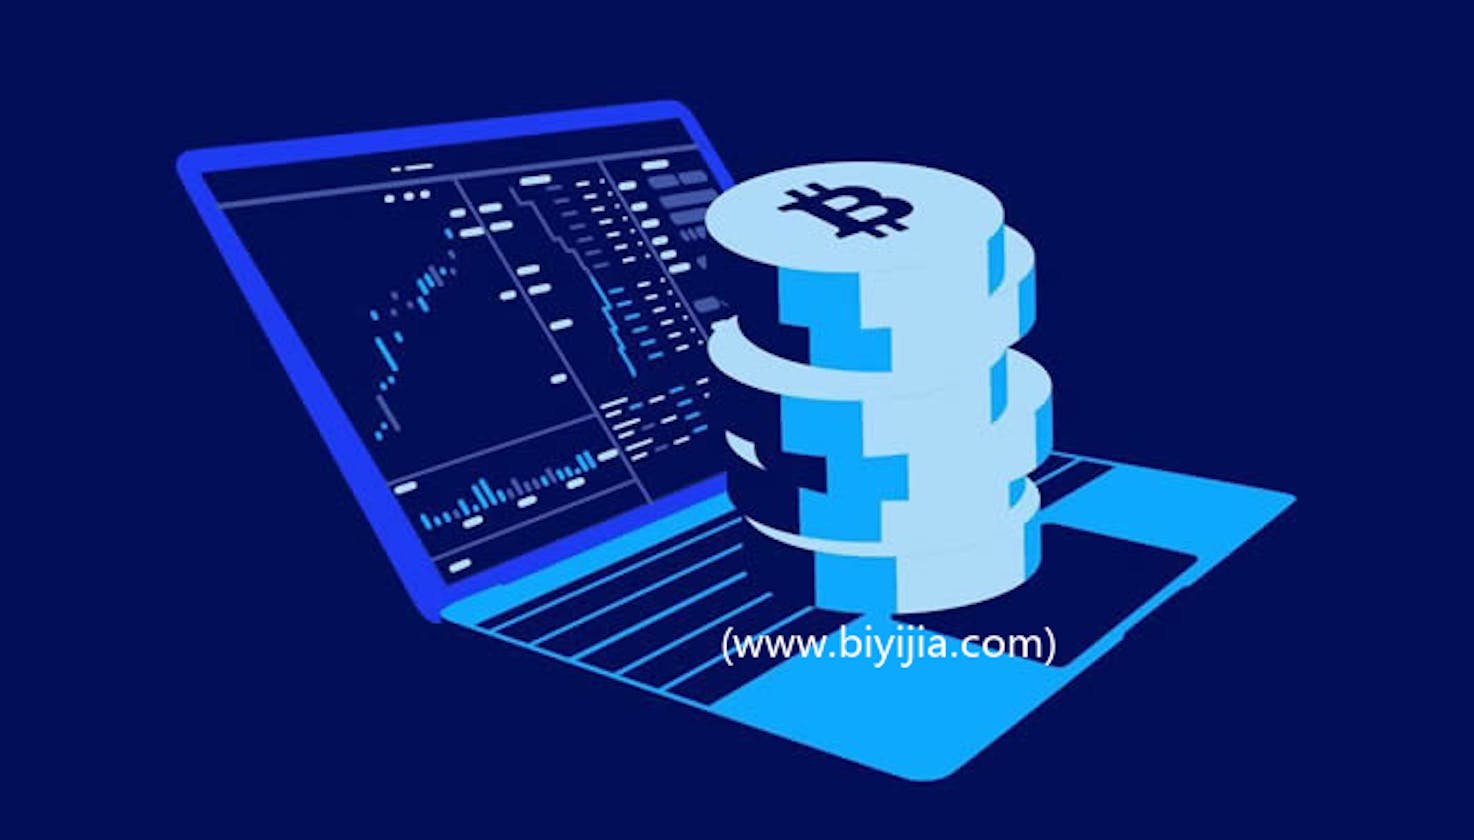 Chain-based exchange means a cryptocurrency exchange that operates on a blockchain network. Some examples of chain-based exchanges include Binance DEX, Waves DEX, and Kyber Network.